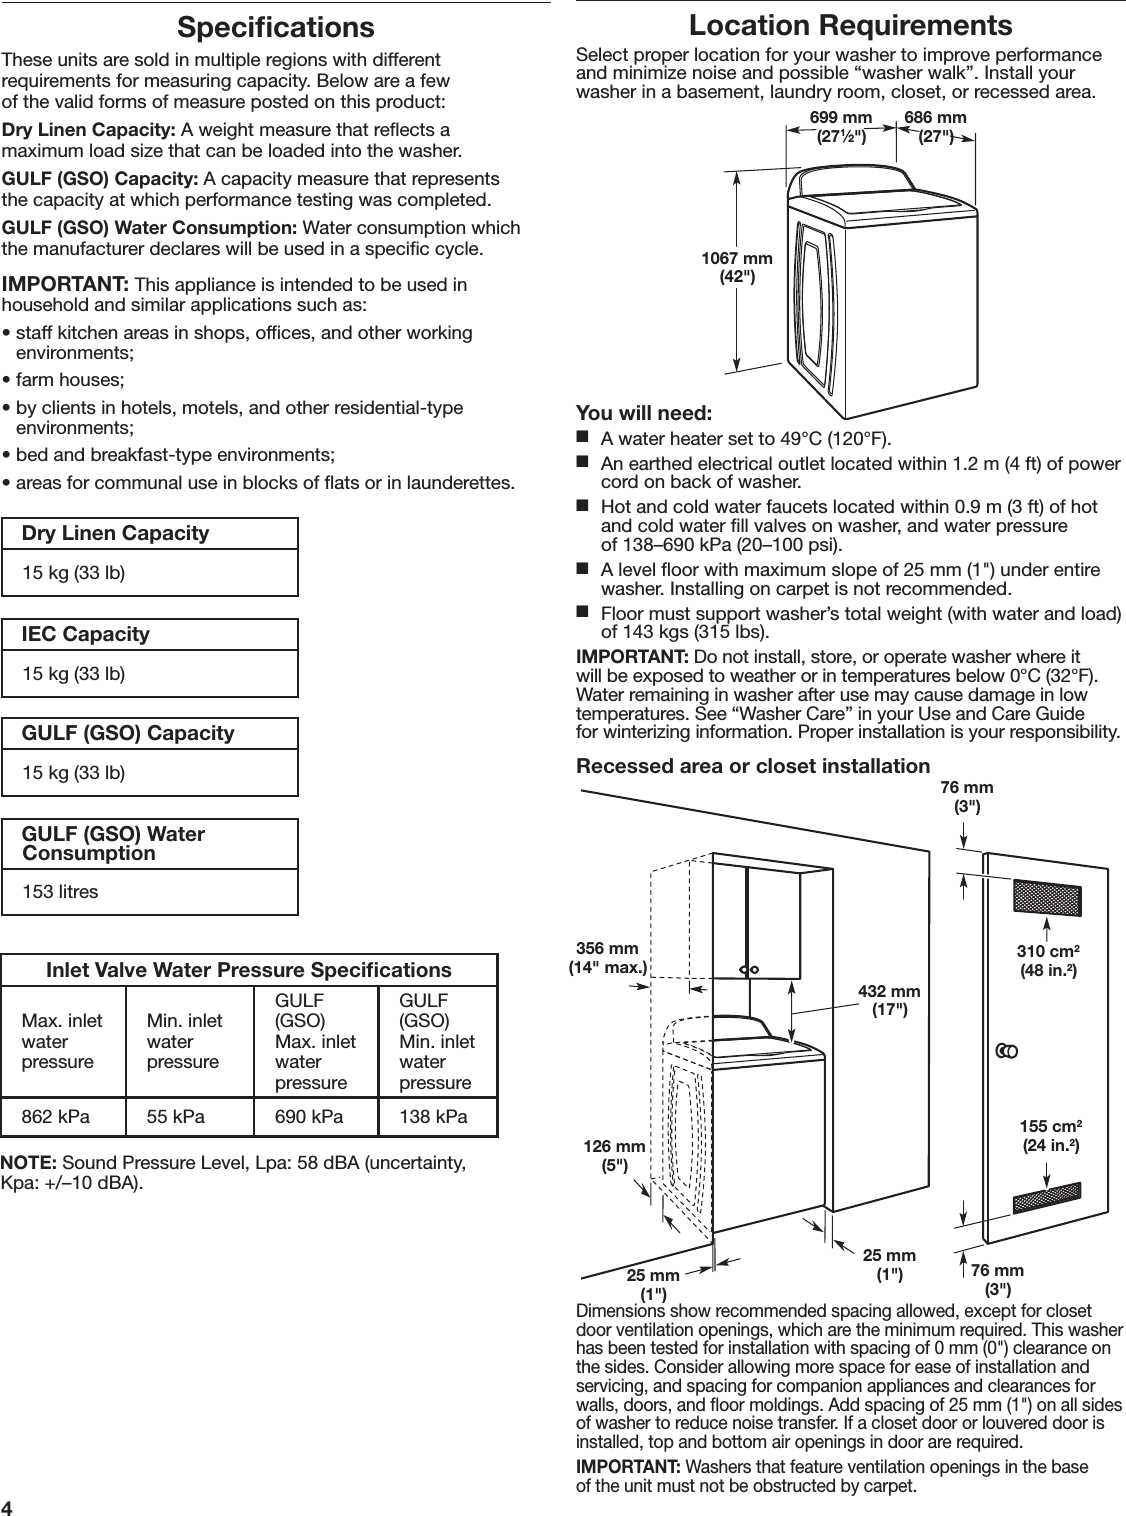 Page 4 of 11 - Whirlpool 4KWTW4815FW0 User Manual  WASHER - Manuals And Guides 1711153L